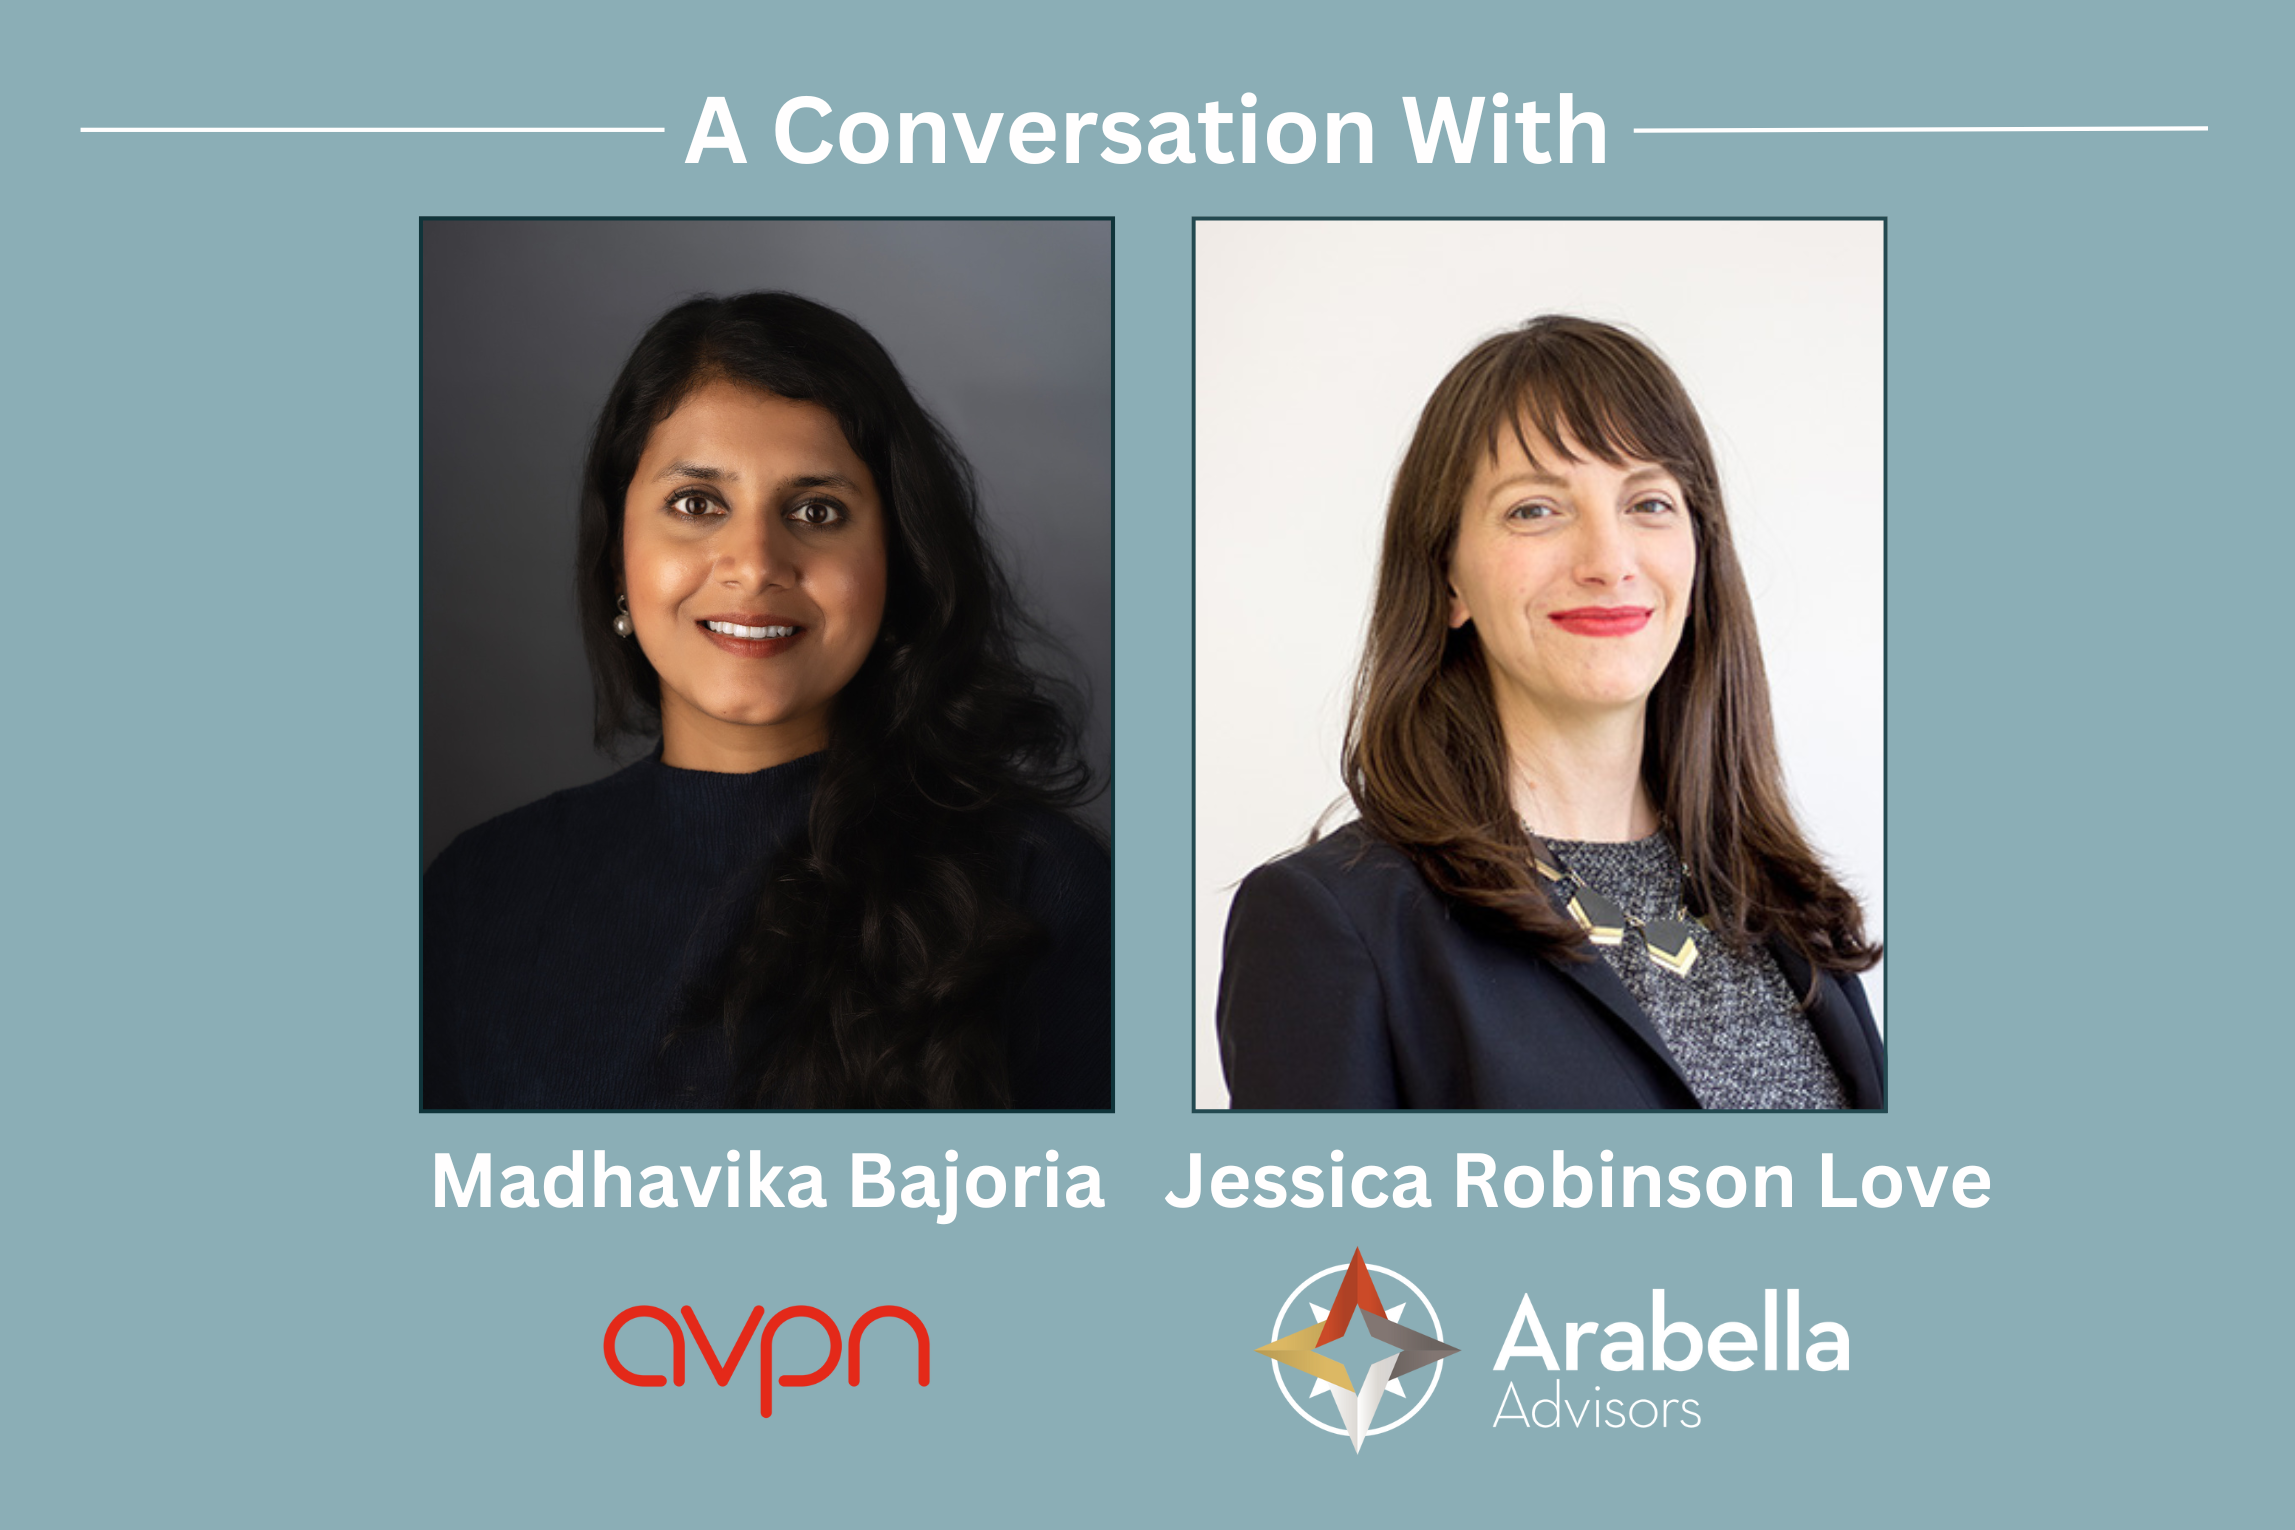 What to Know About Philanthropy in Asia: A Conversation with AVPN’s Madhavika Bajoria